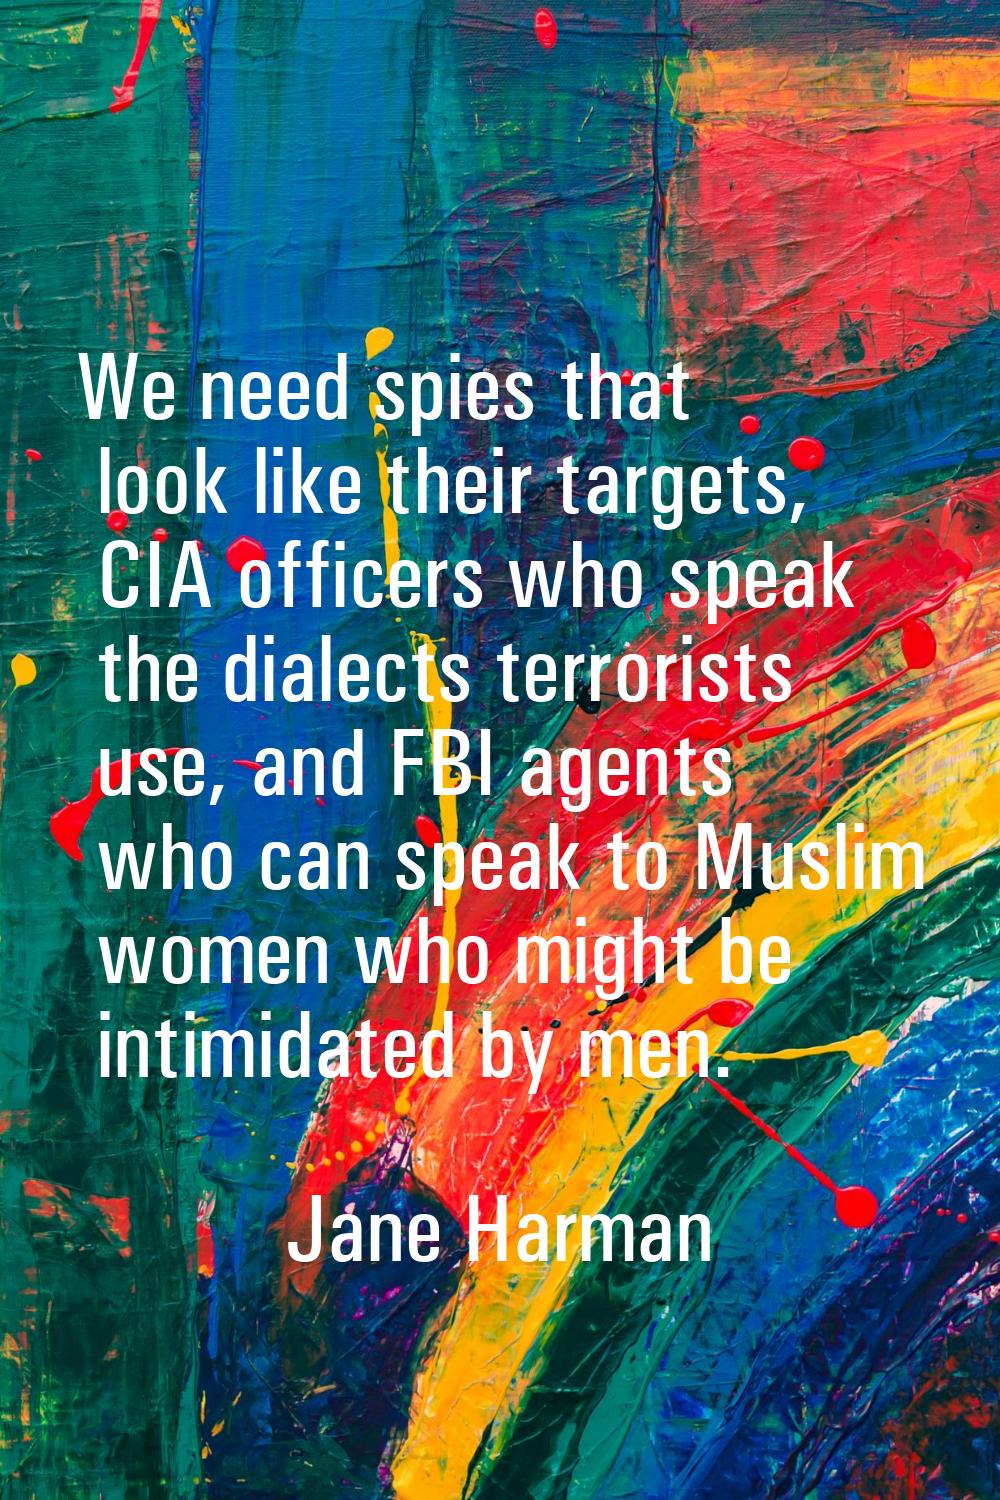 We need spies that look like their targets, CIA officers who speak the dialects terrorists use, and